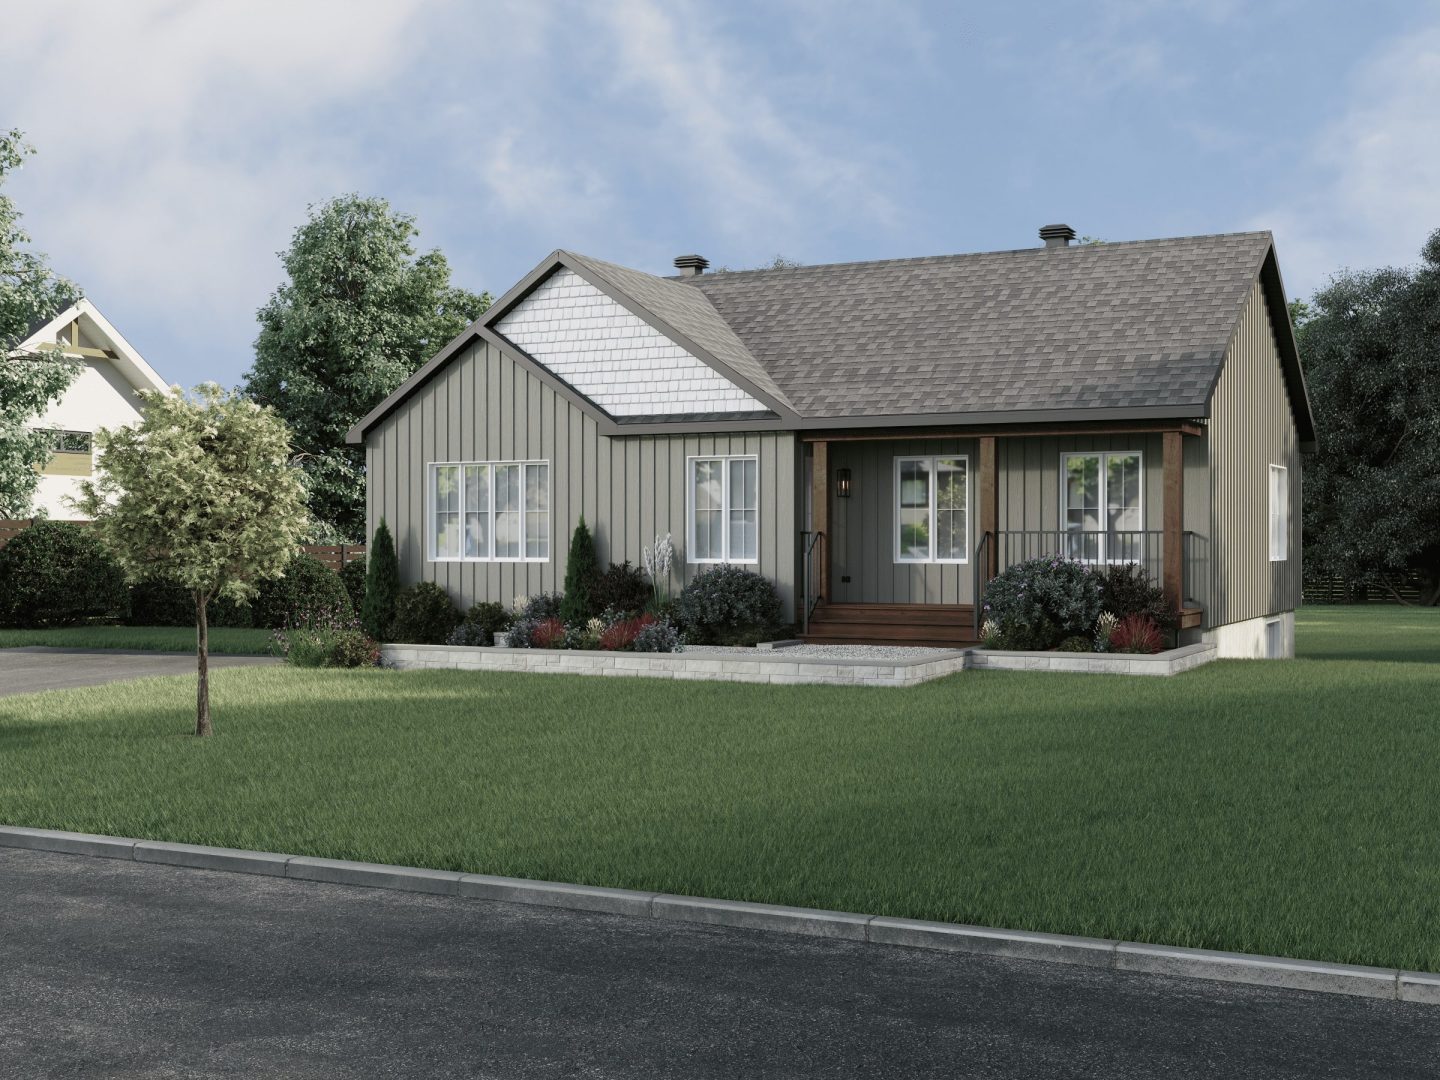 Emeraude model, a single-storey home in the Classic style. Exterior view